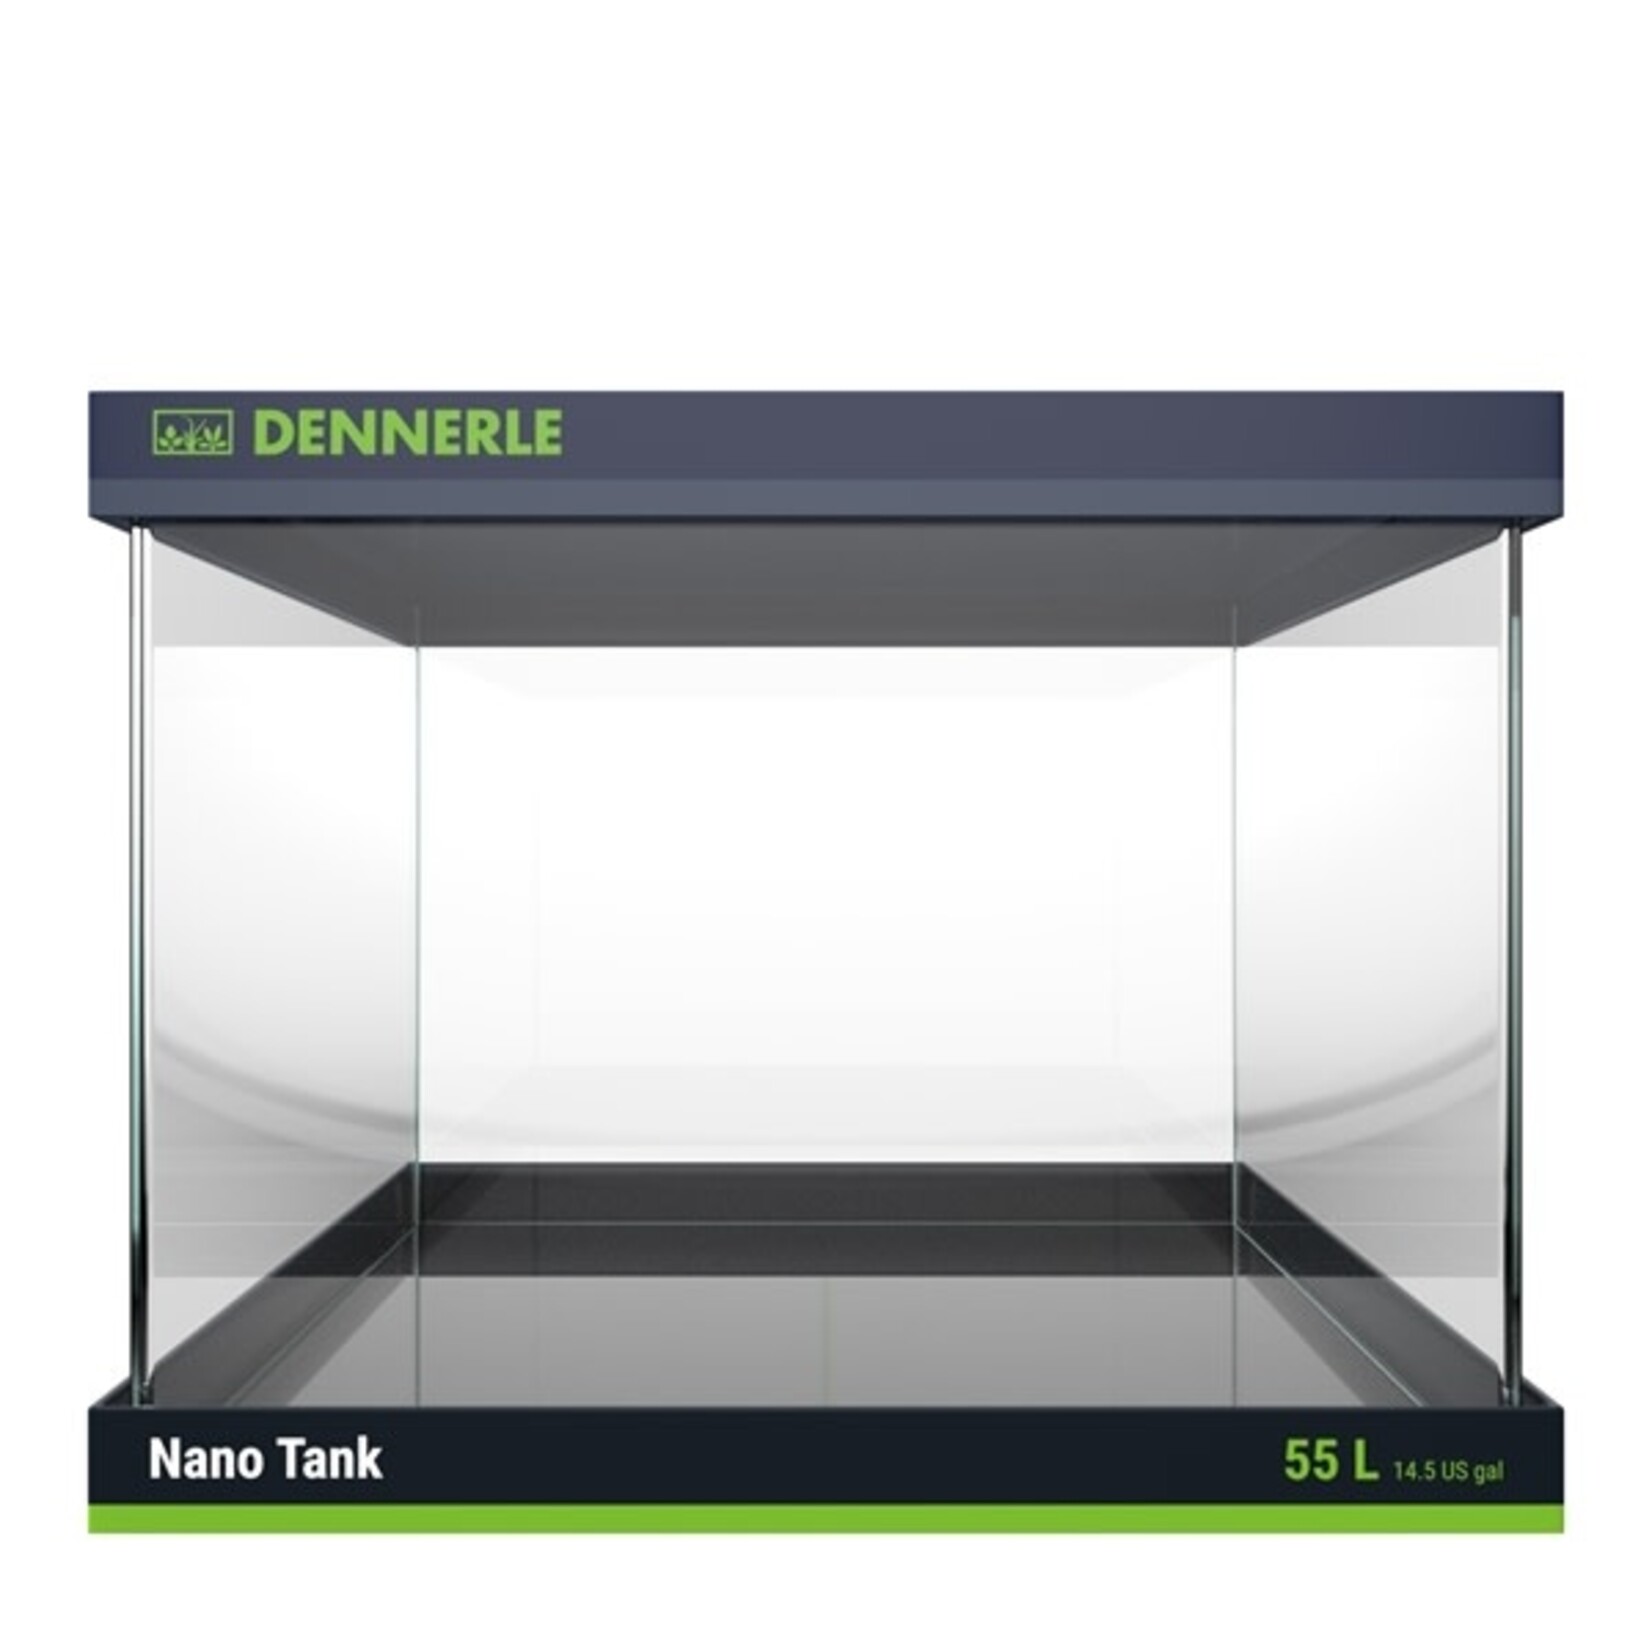 Dennerle DENNERLE NANO SCAPERS TANK 55 L